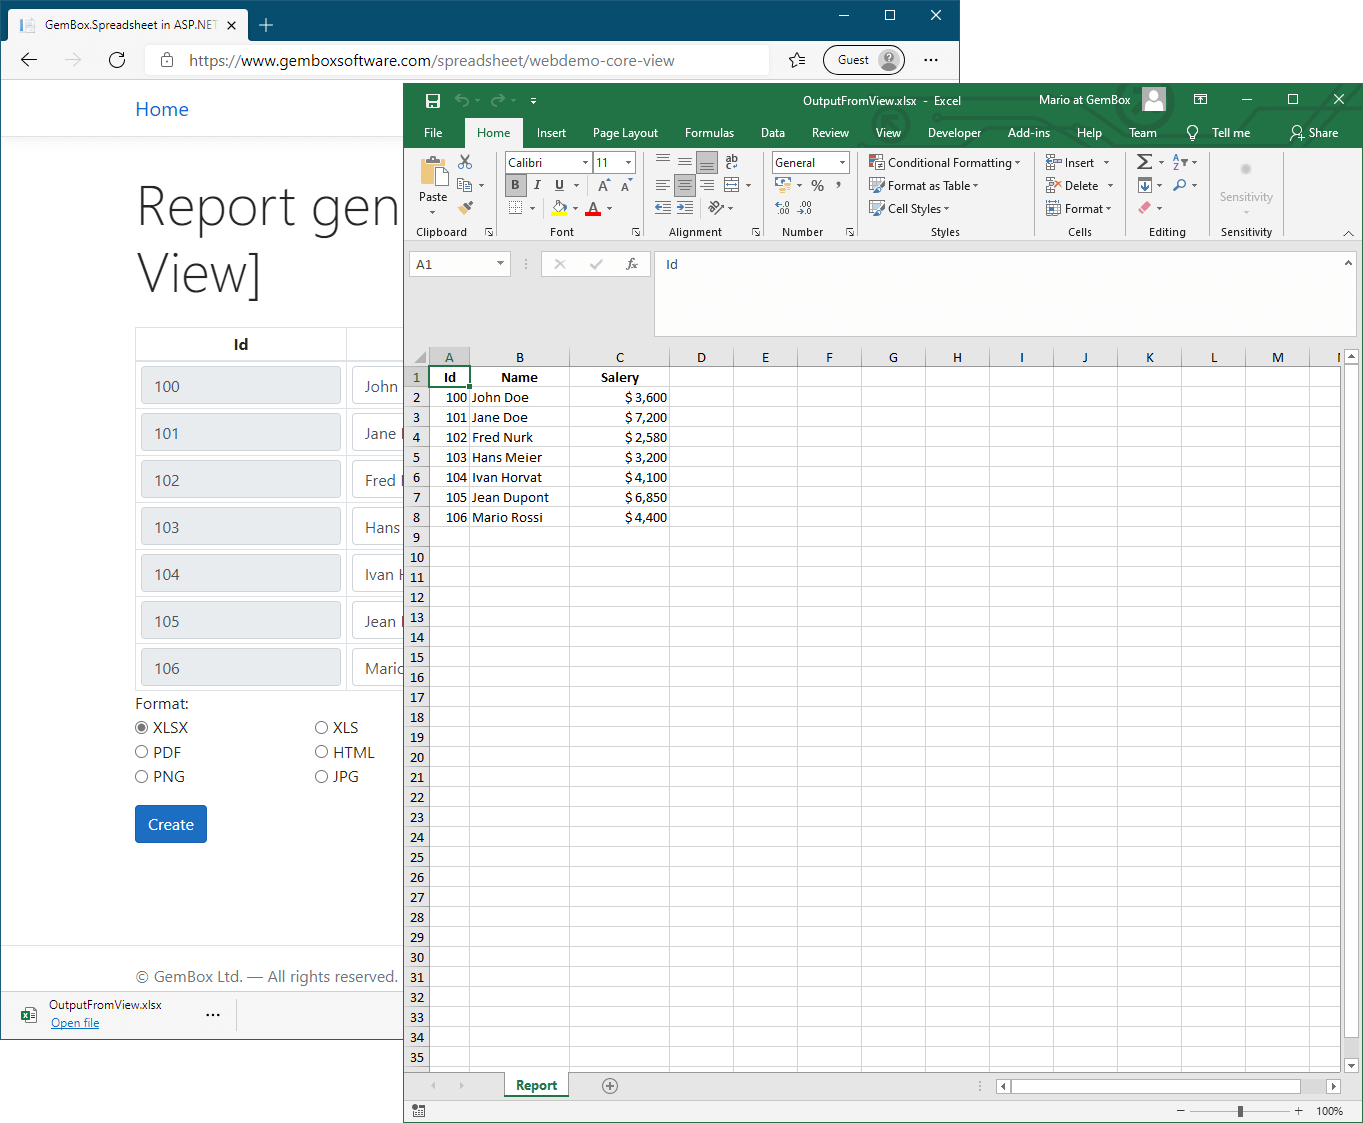  Create Excel Xlsx Or Pdf From Asp Net Core Application 14904 Hot Sex Picture